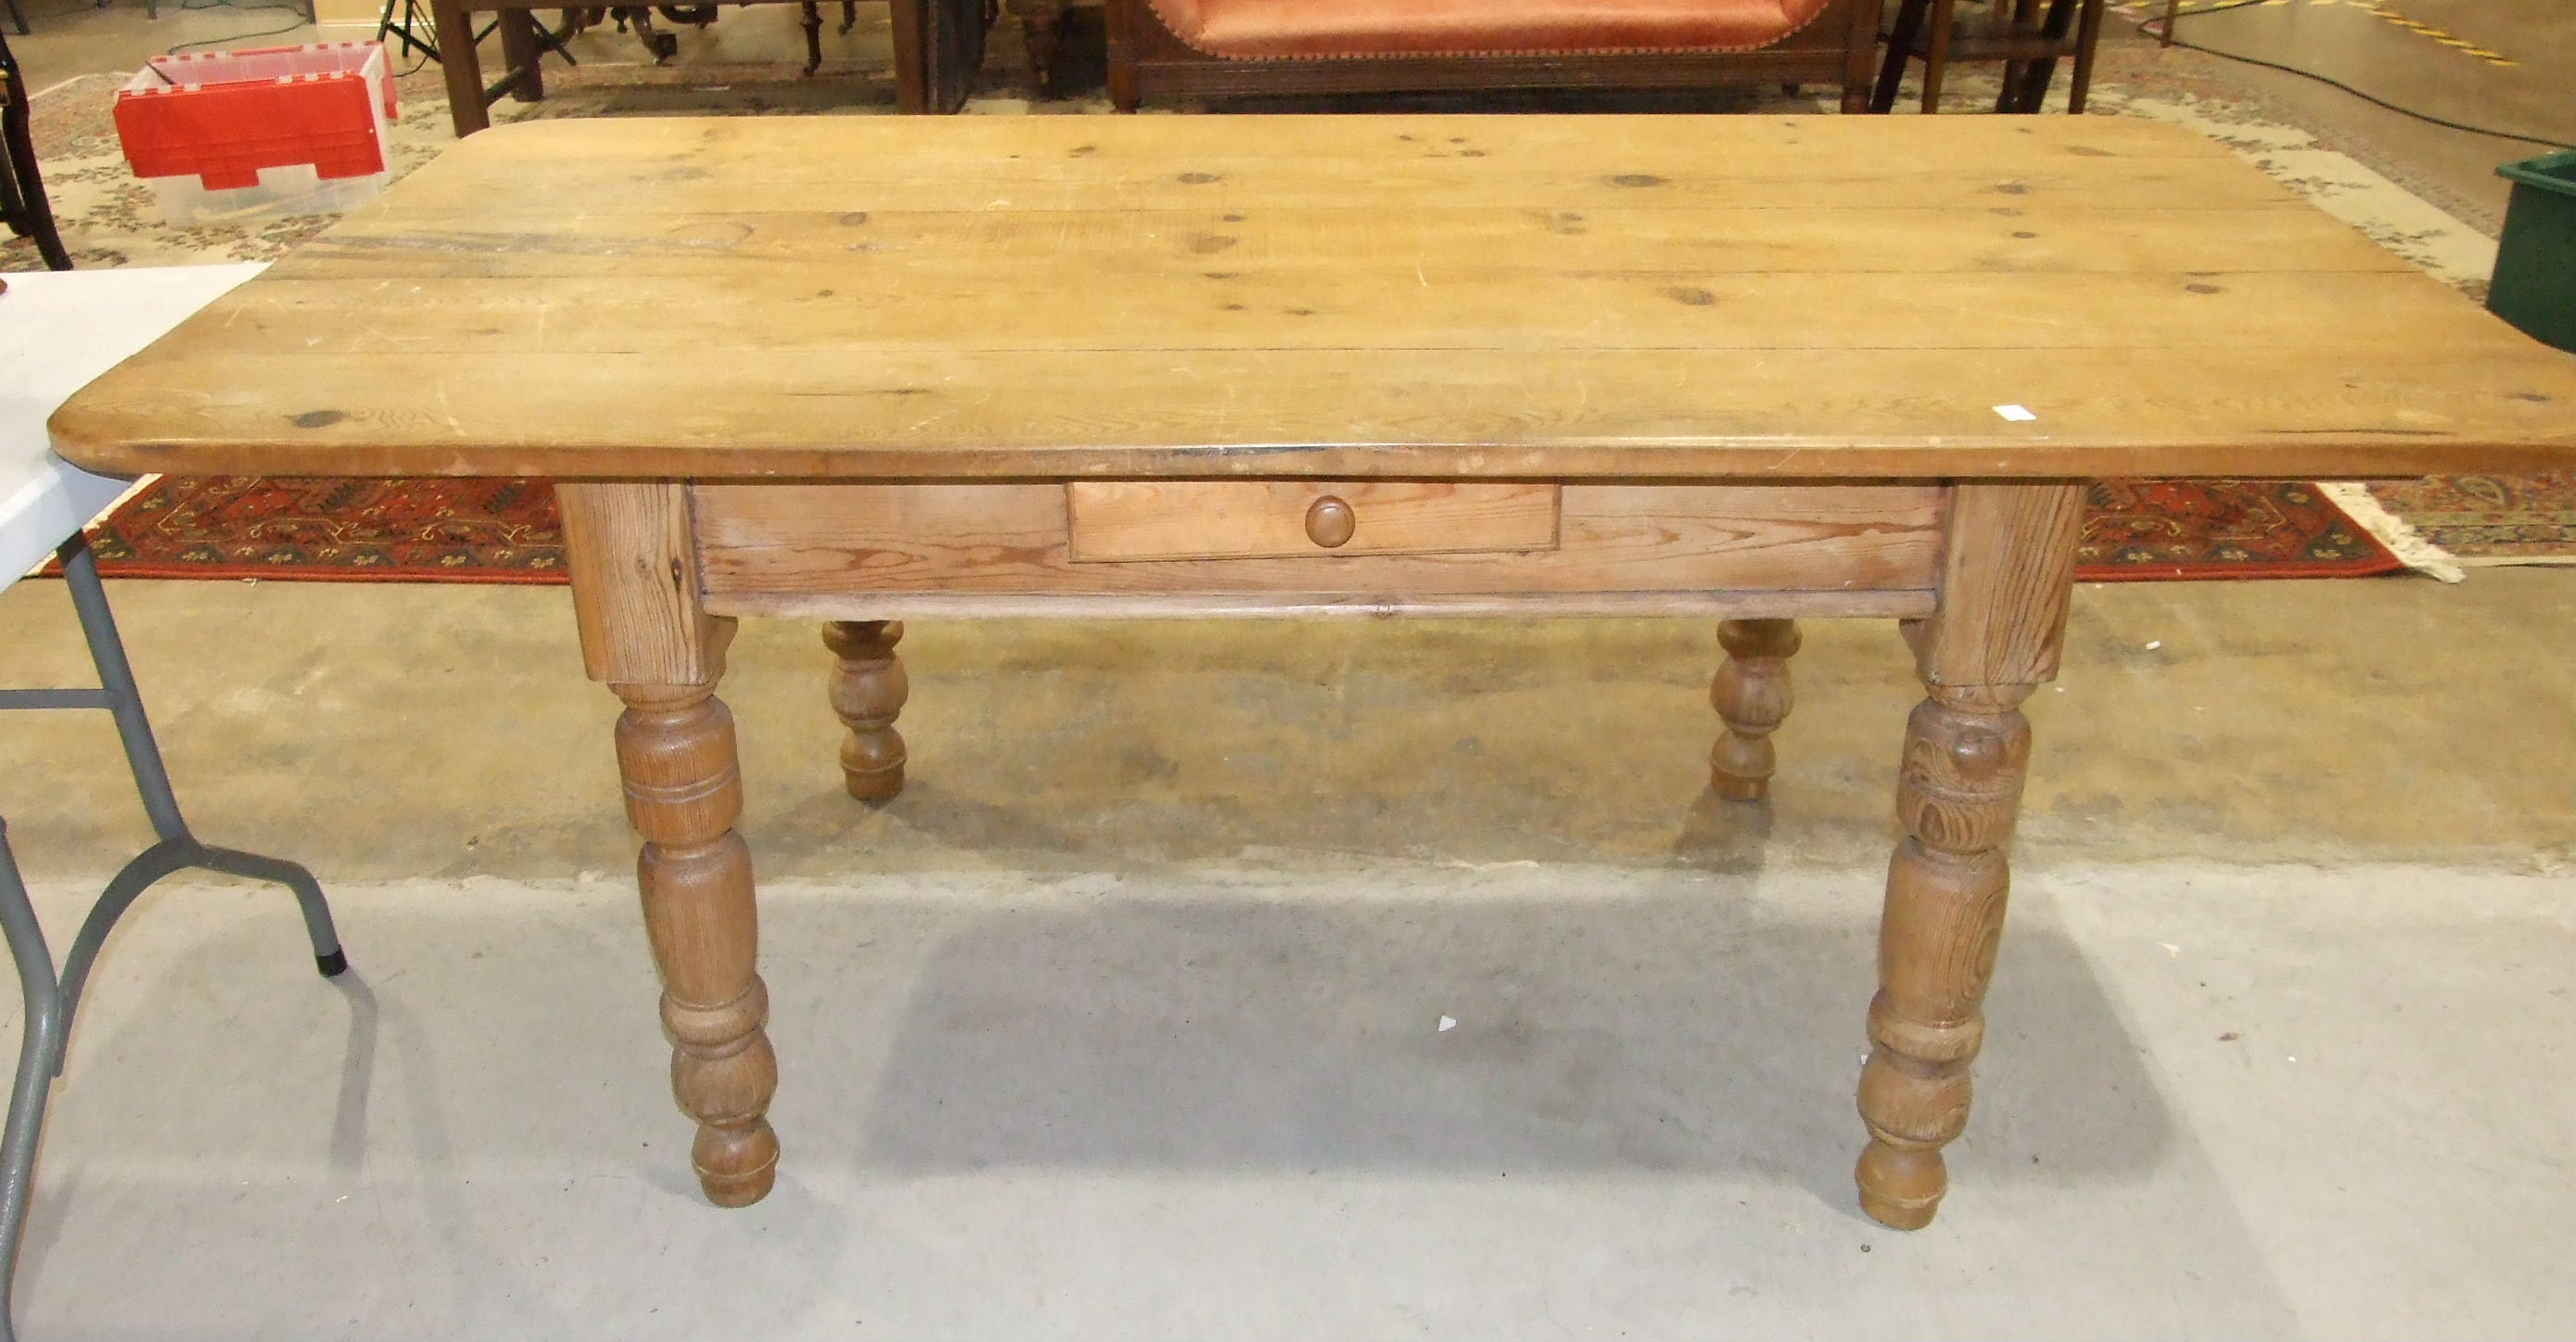 A pine kitchen table fitted with a single drawer, on turned legs, 180 x 94cm.